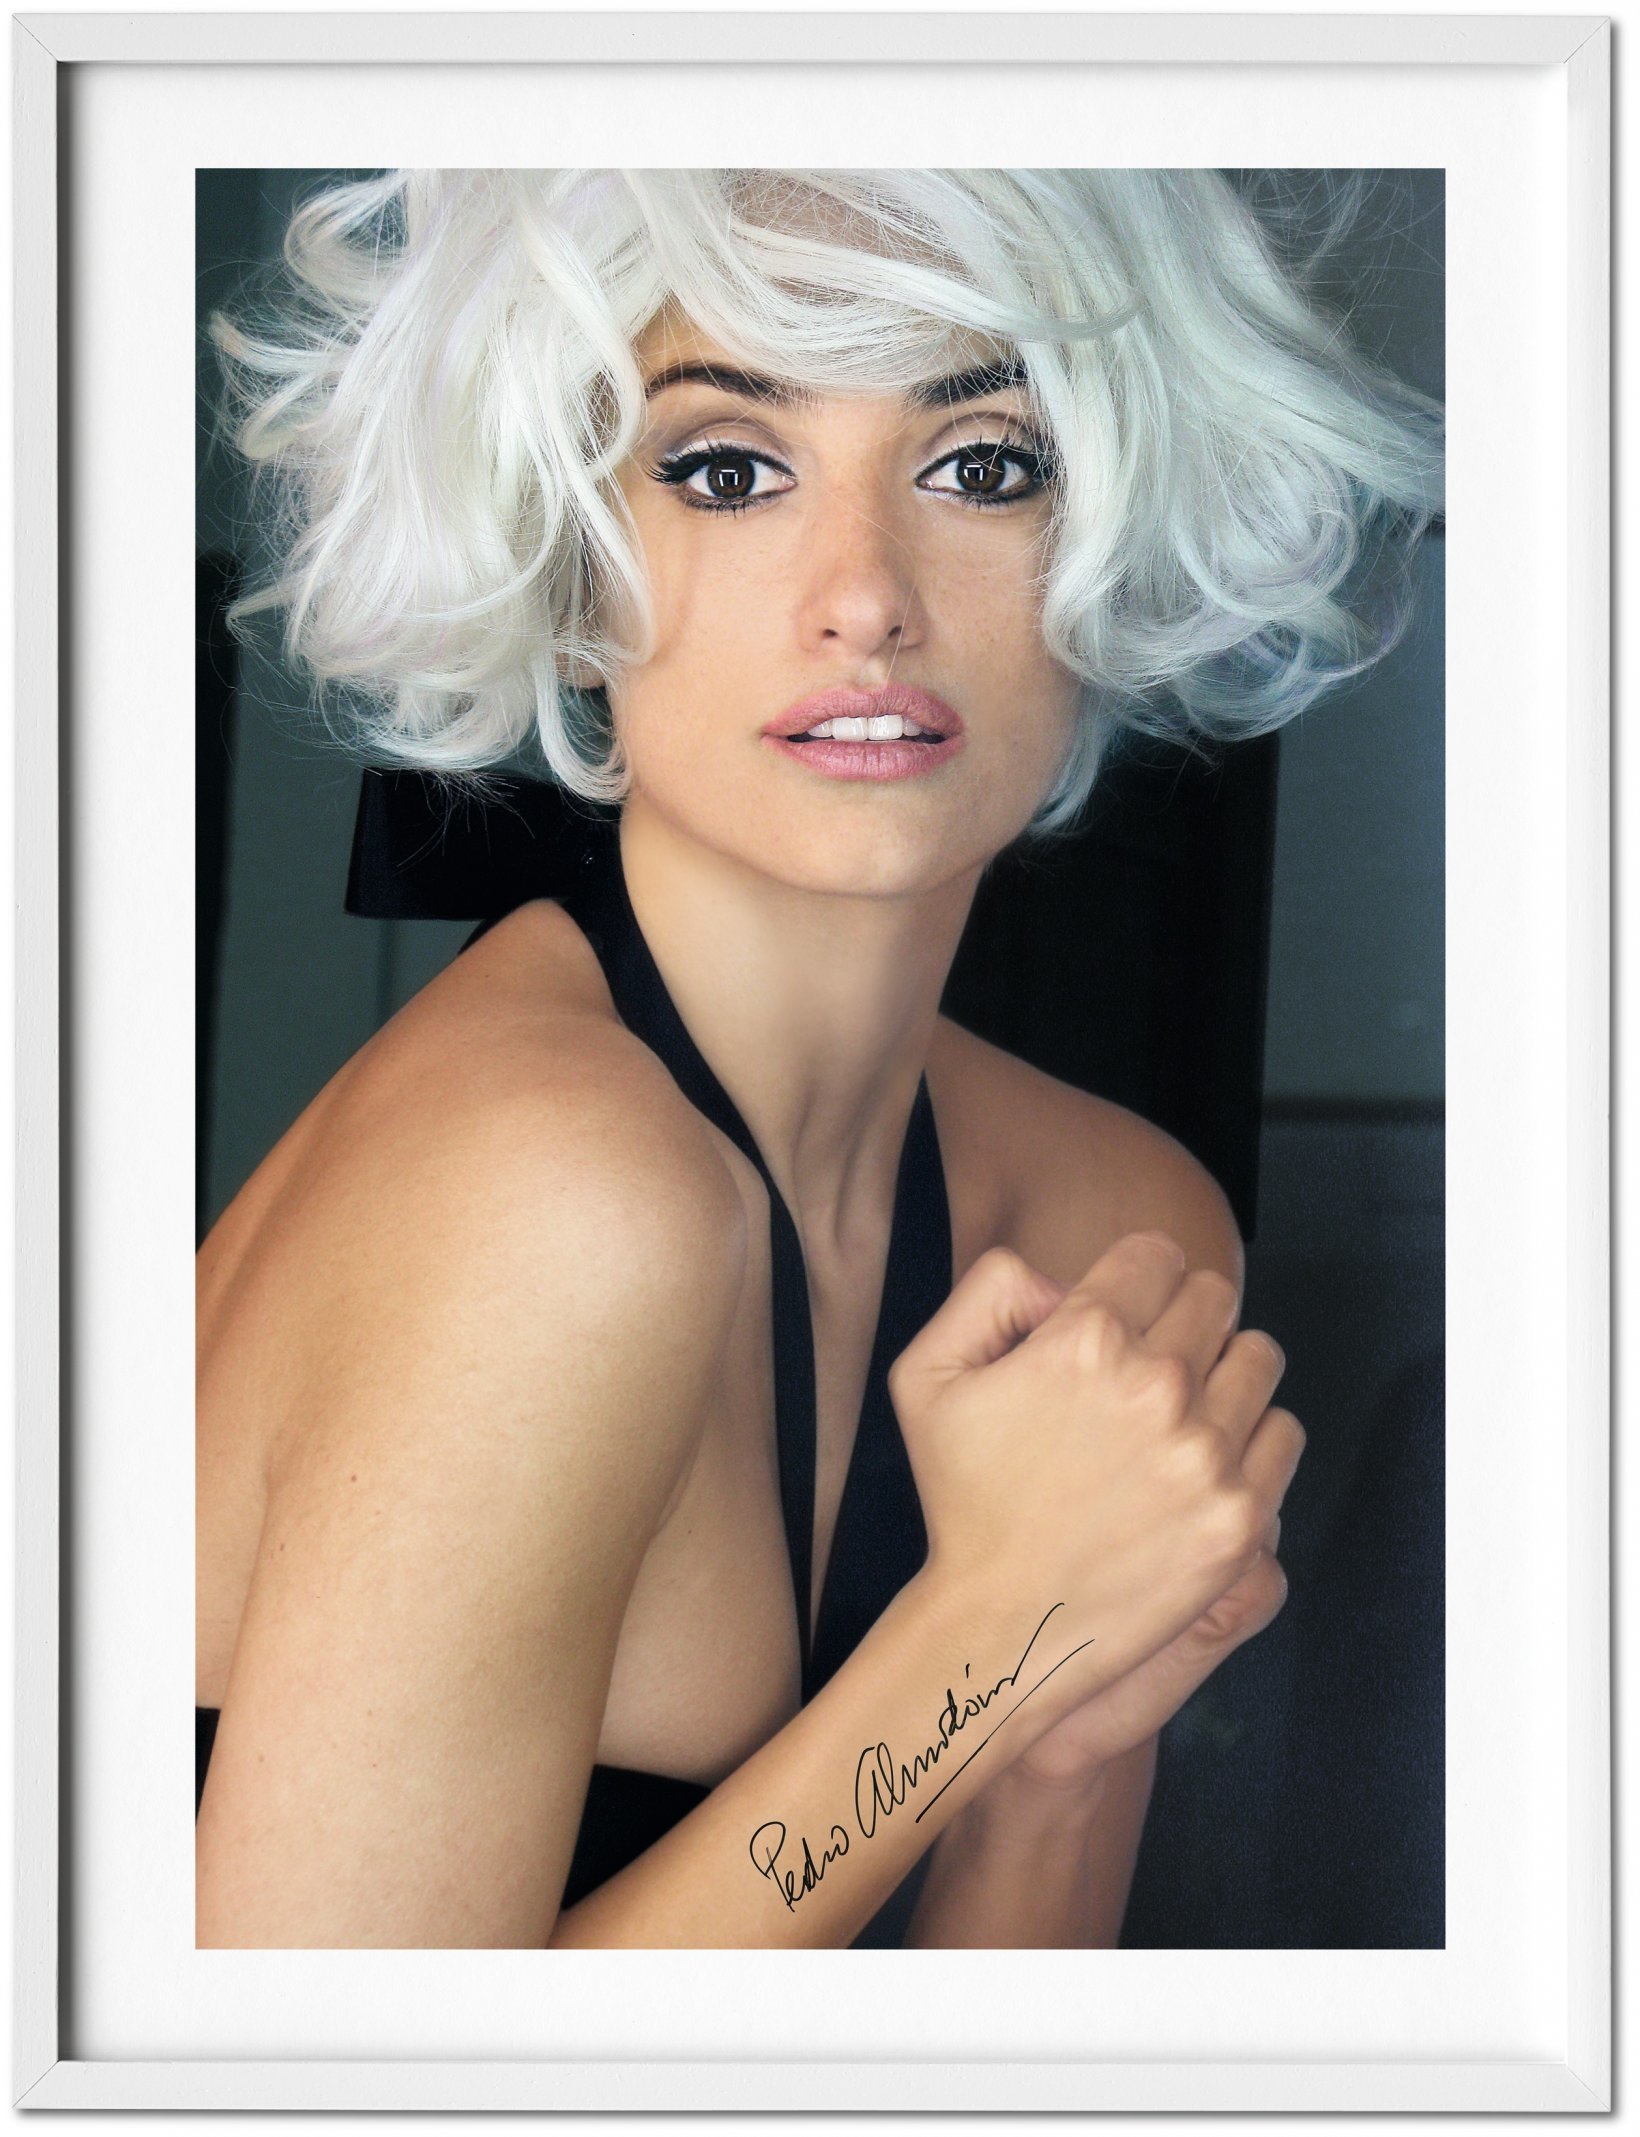 Art Edition No. 1â€“500PenÃ©lope, as Marilyn, 2008, photographed by Pedro Almo...